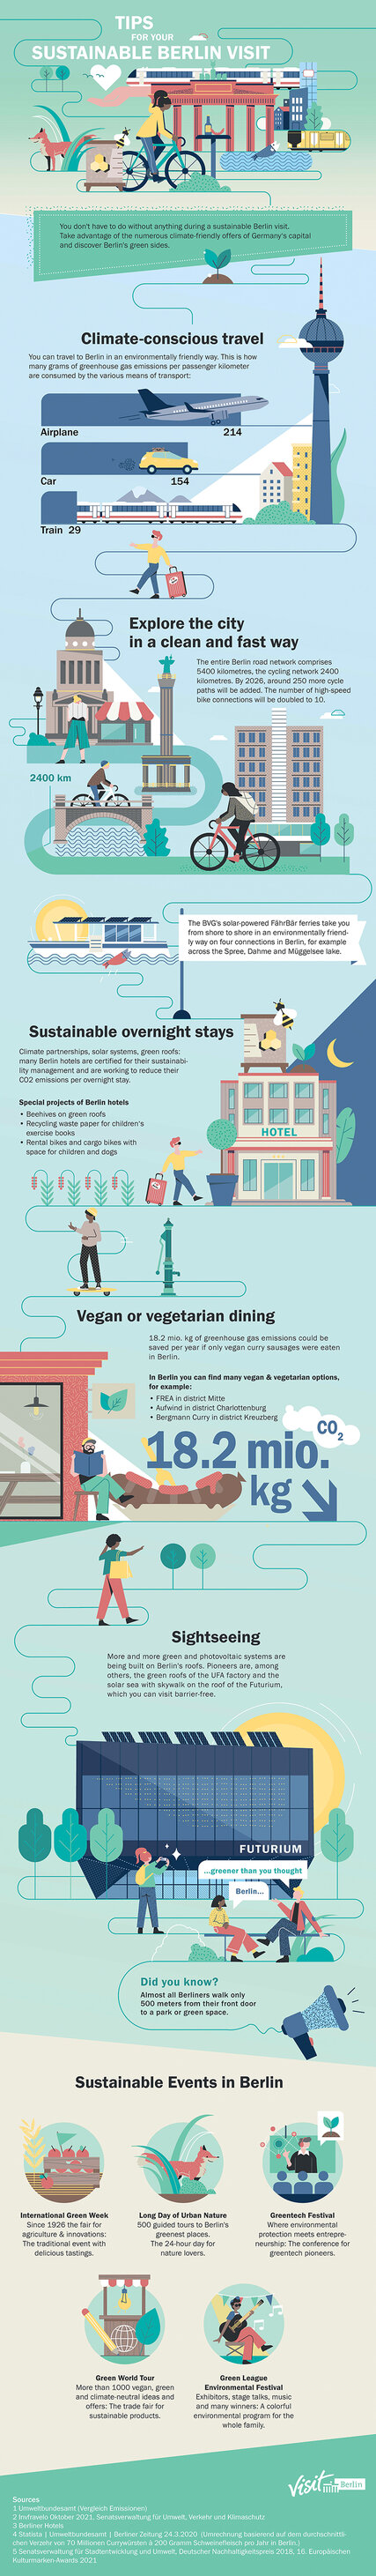 Infographics: Tips for Your Sustainable Berlin Visit